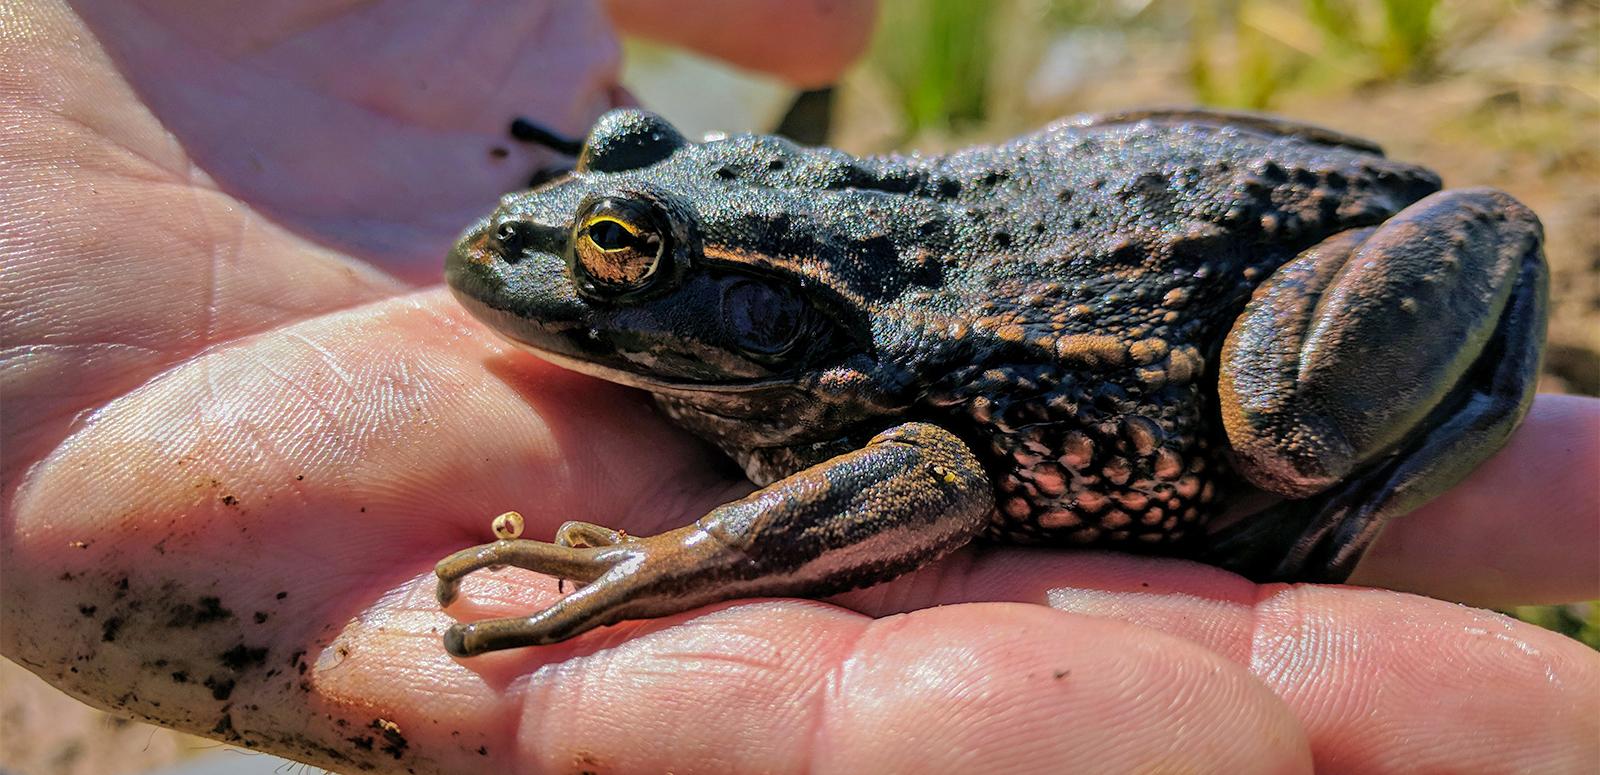 A growling grass frog sitting on the fingers of a man's hand